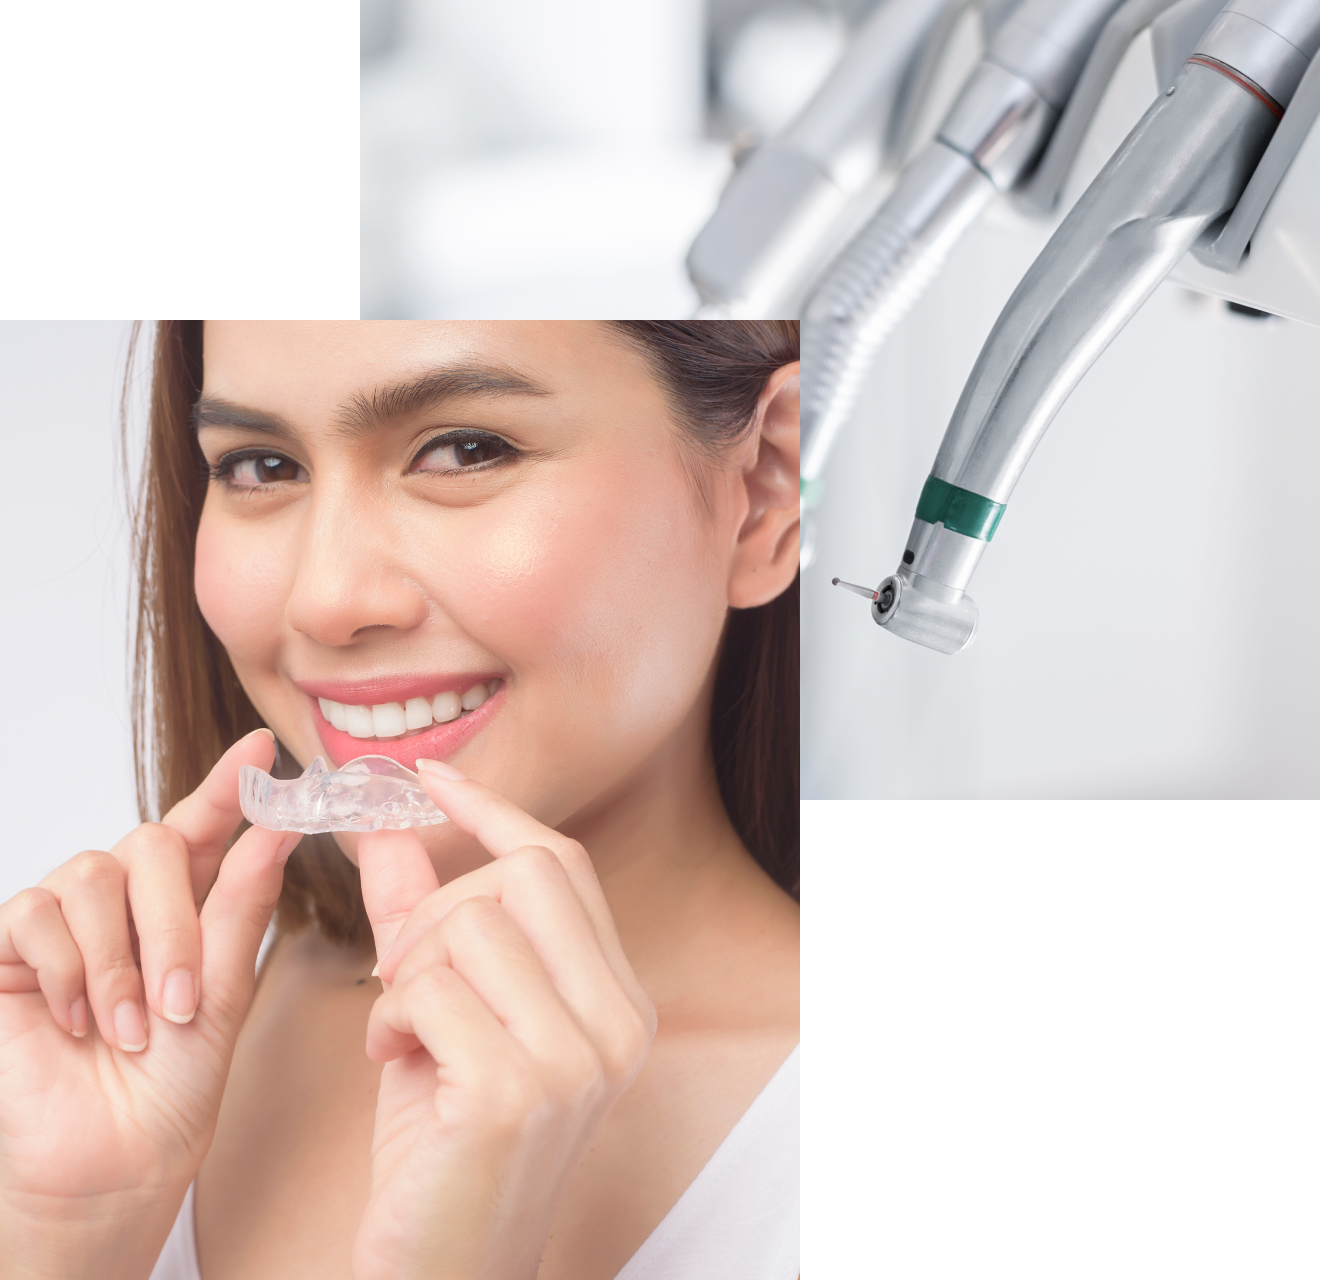 A photograph of a smiling young woman holding a clear aligner tray, similar to the types of trays used for clear aligner treatments and Invisalign in Invisalign in Burnaby at VCCID